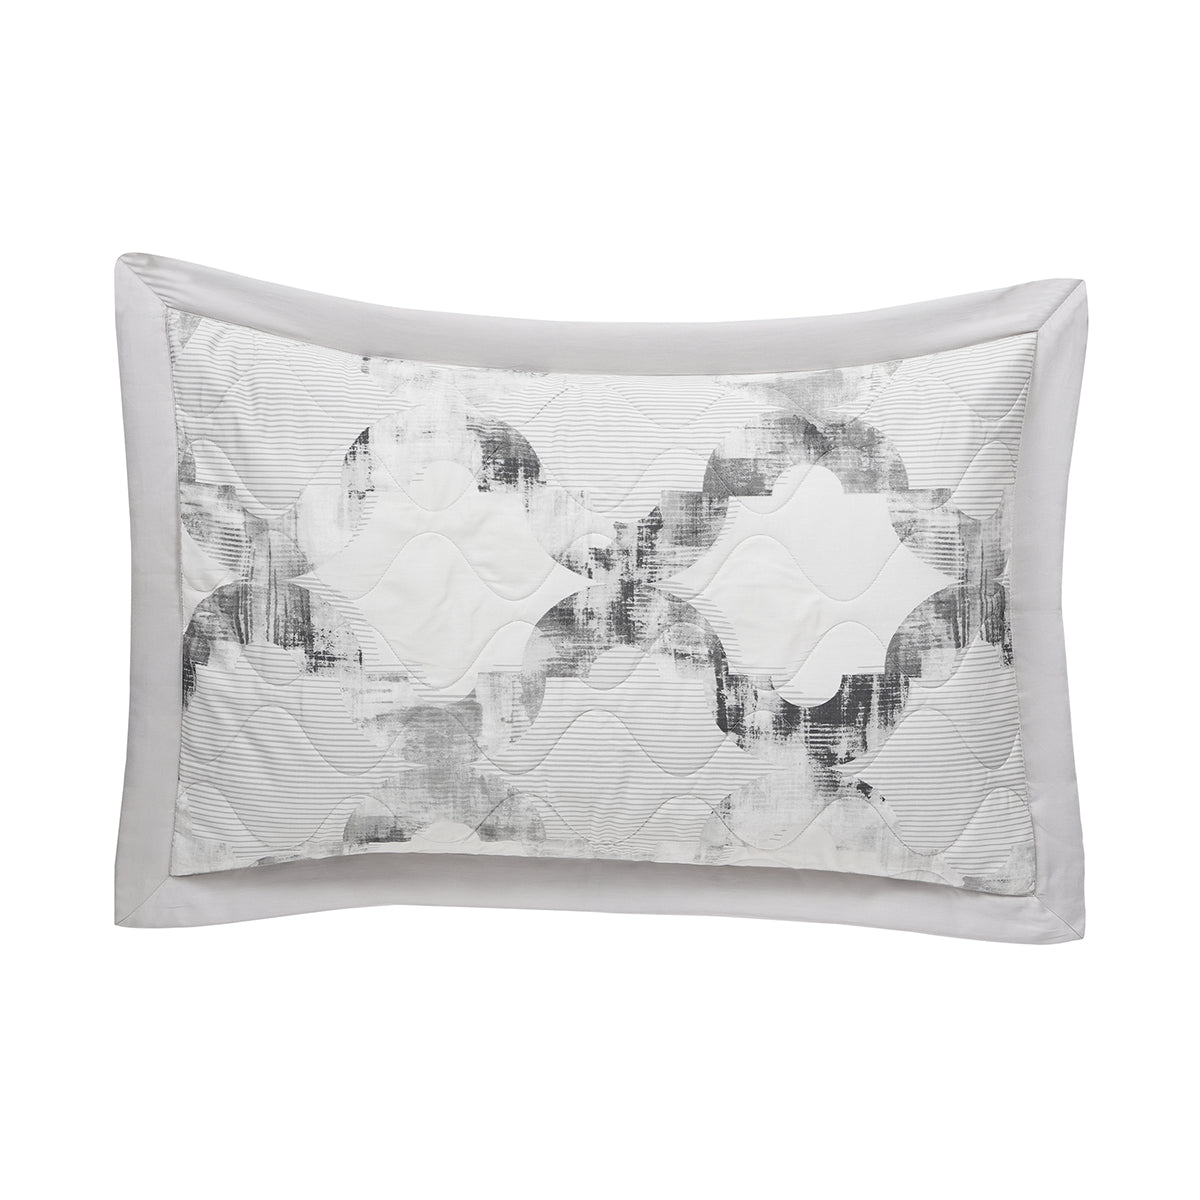 Enchanted Harmony Ogee Flent Quilted Pillow Sham Set Of 2